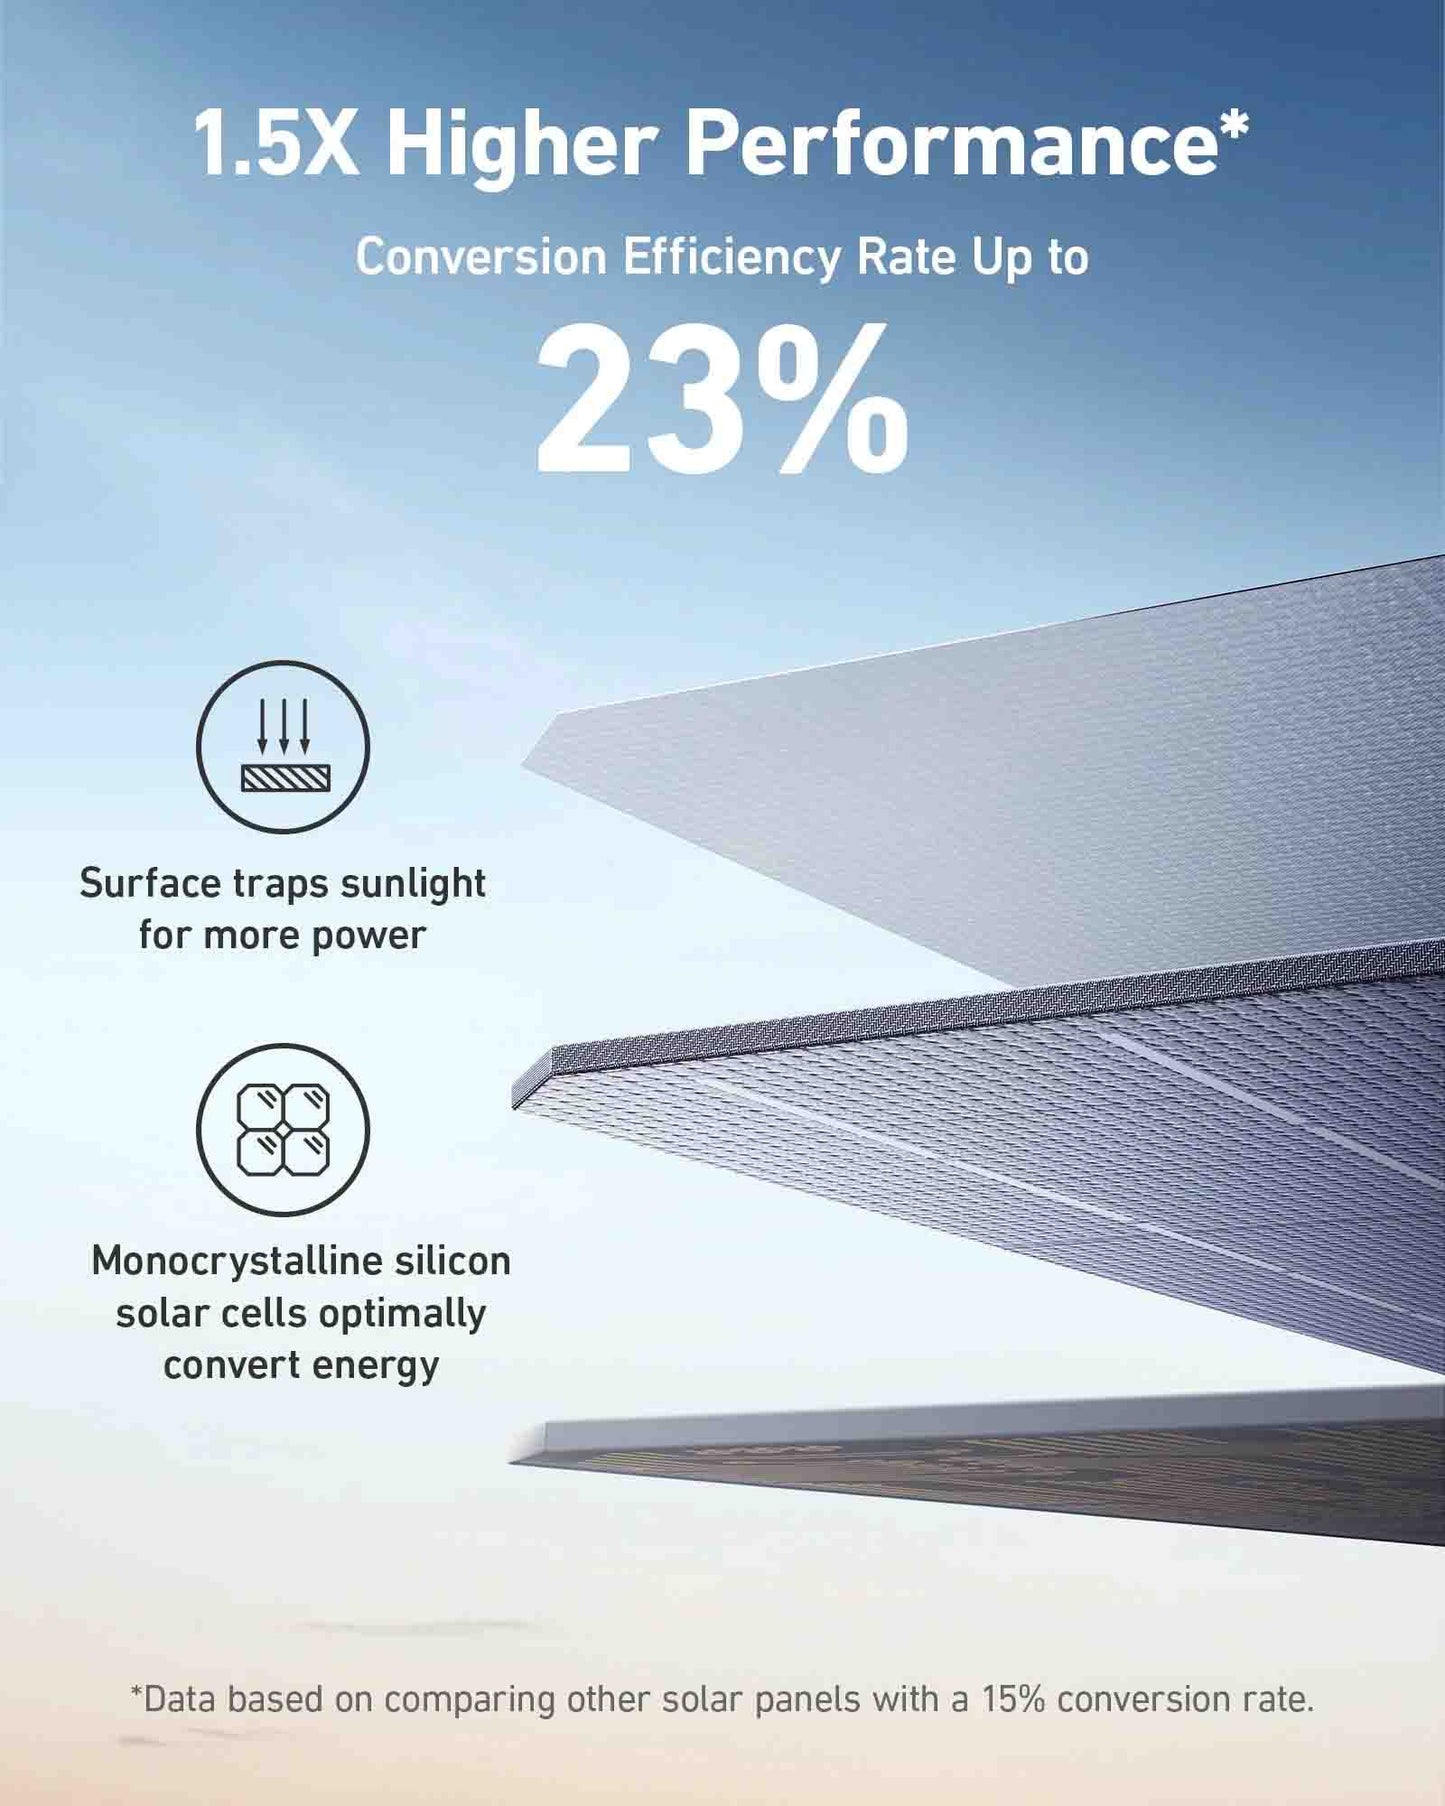 Experience 1.5X Performance With The Anker 521 200W Solar Panel